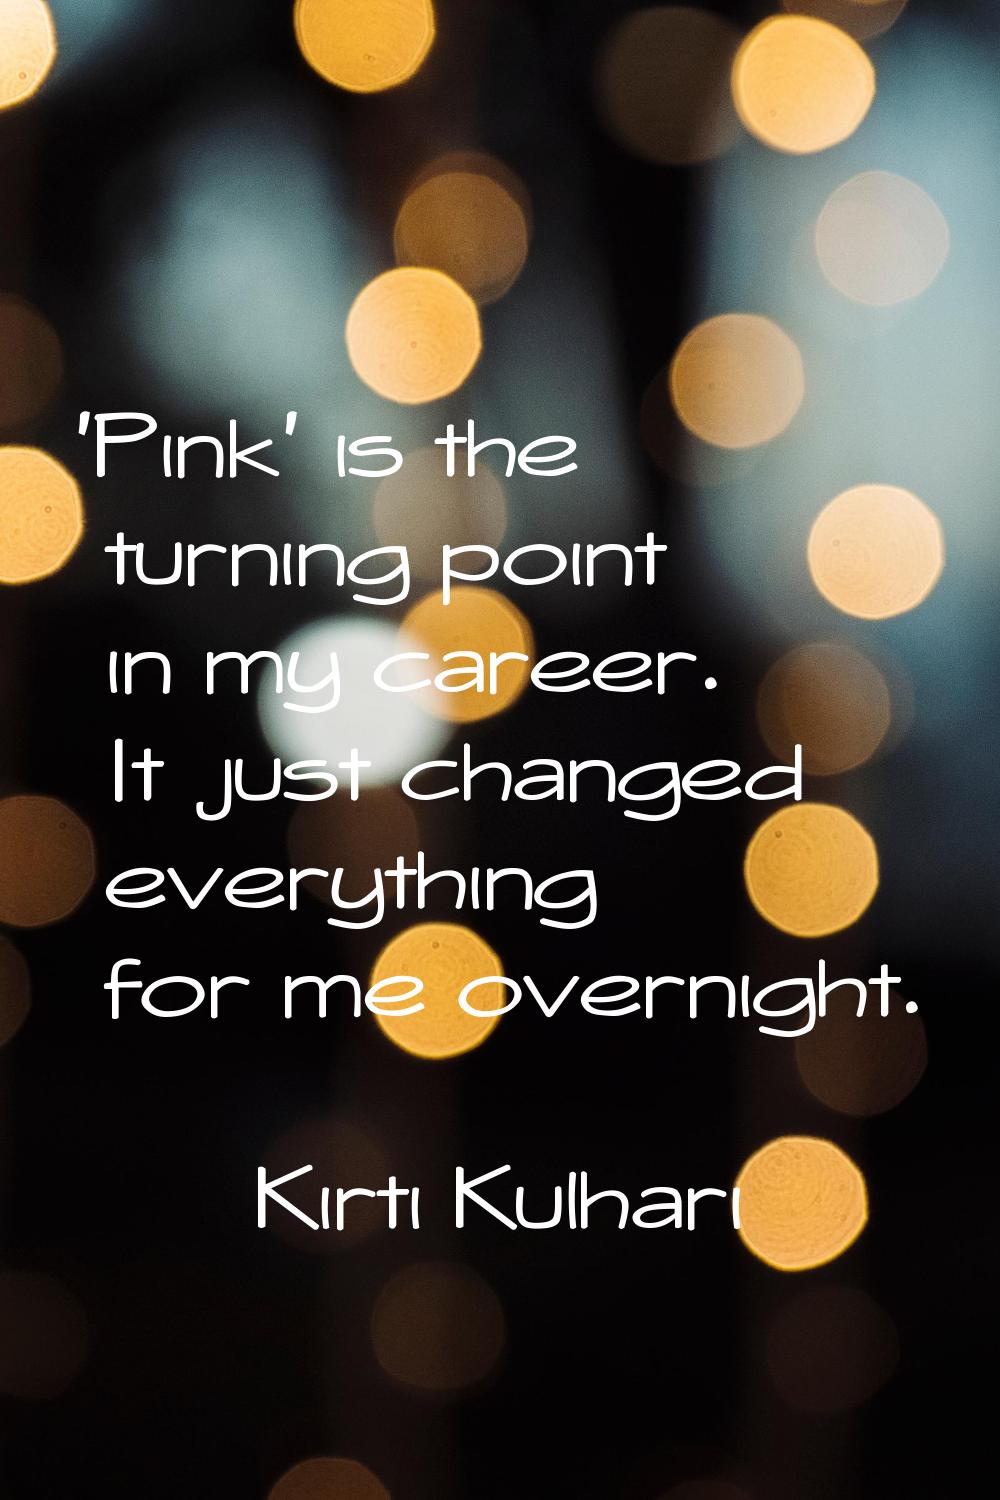 'Pink' is the turning point in my career. It just changed everything for me overnight.